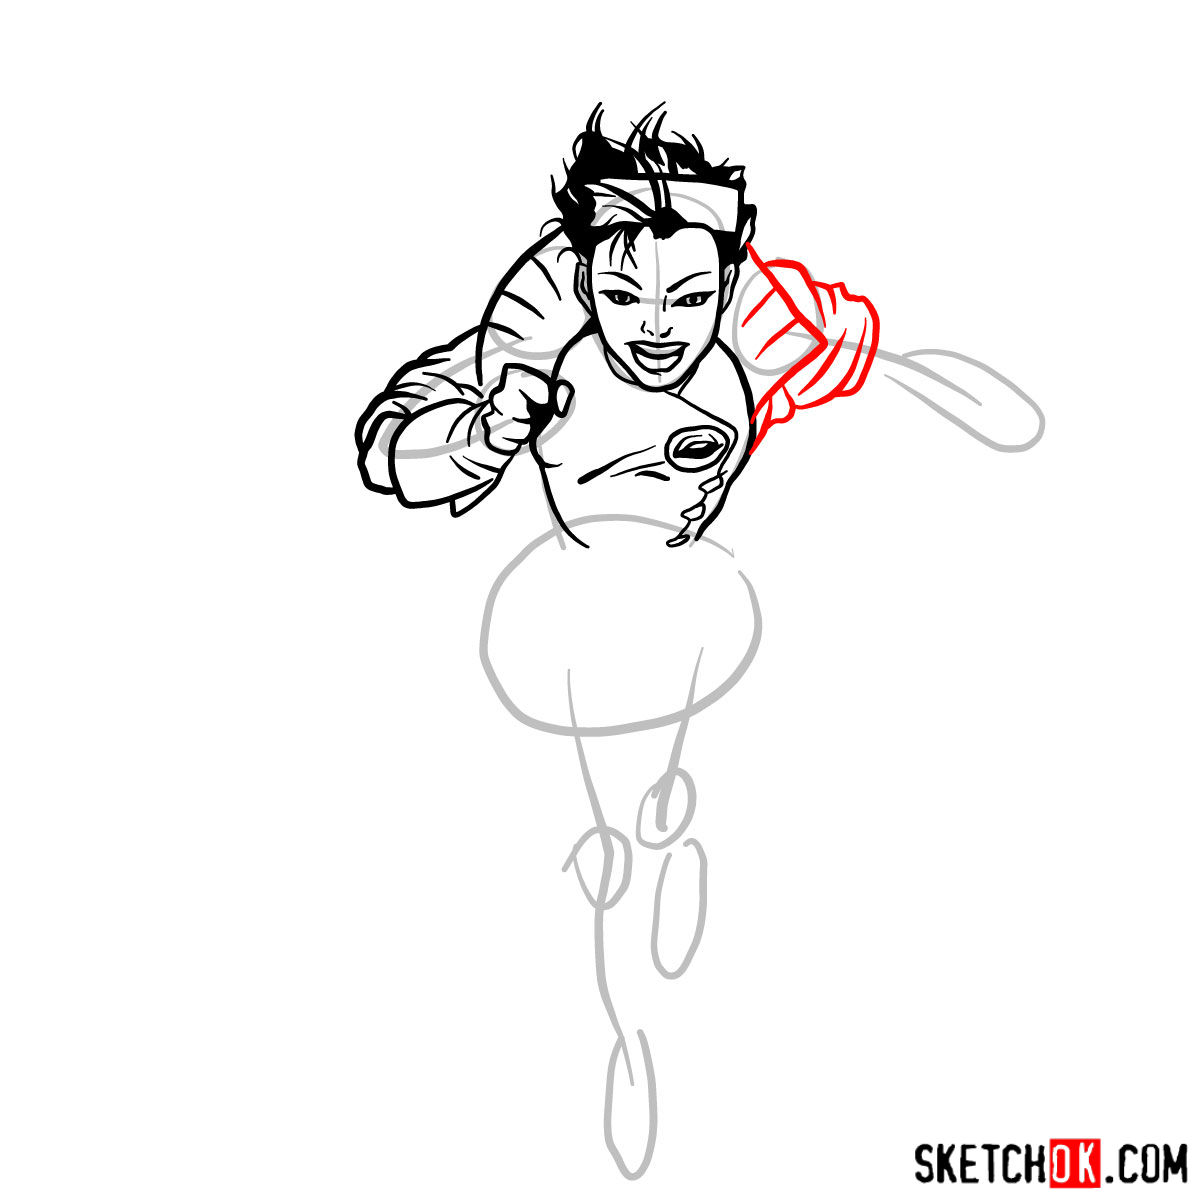 How to draw Jubilee mutant from X-Men series - step 08